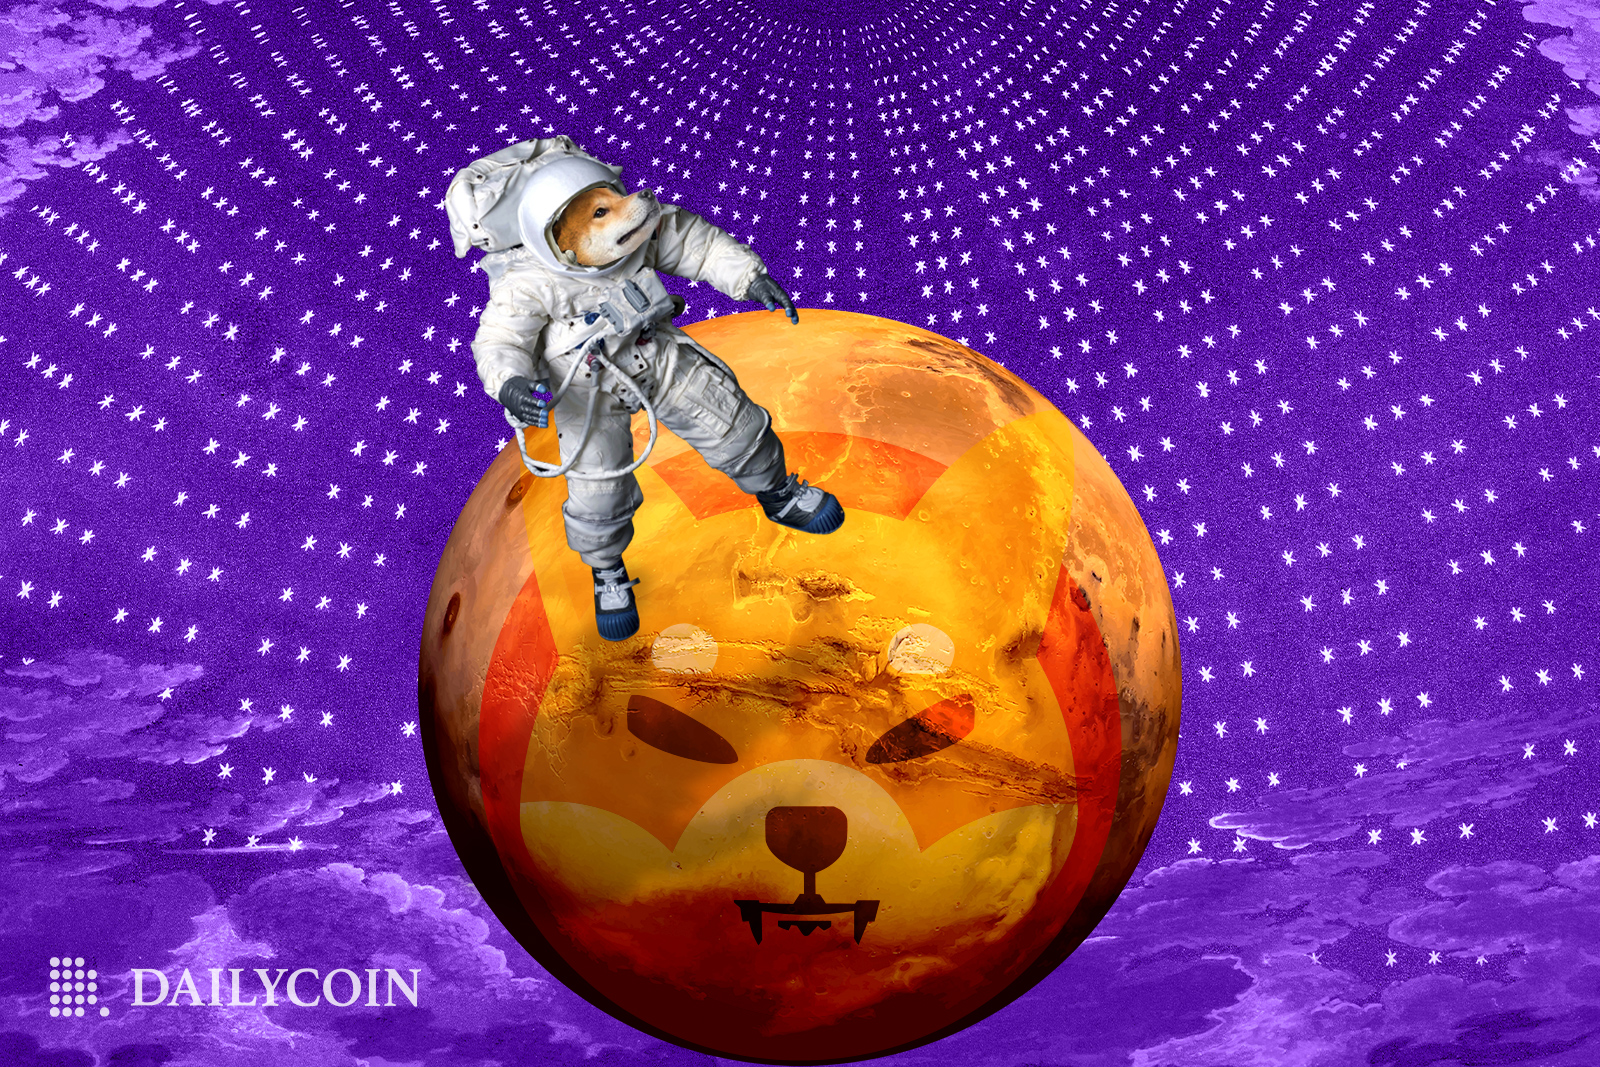 A Shiba Inu in a astronaut suit is standing on a planet with a SHIB logo